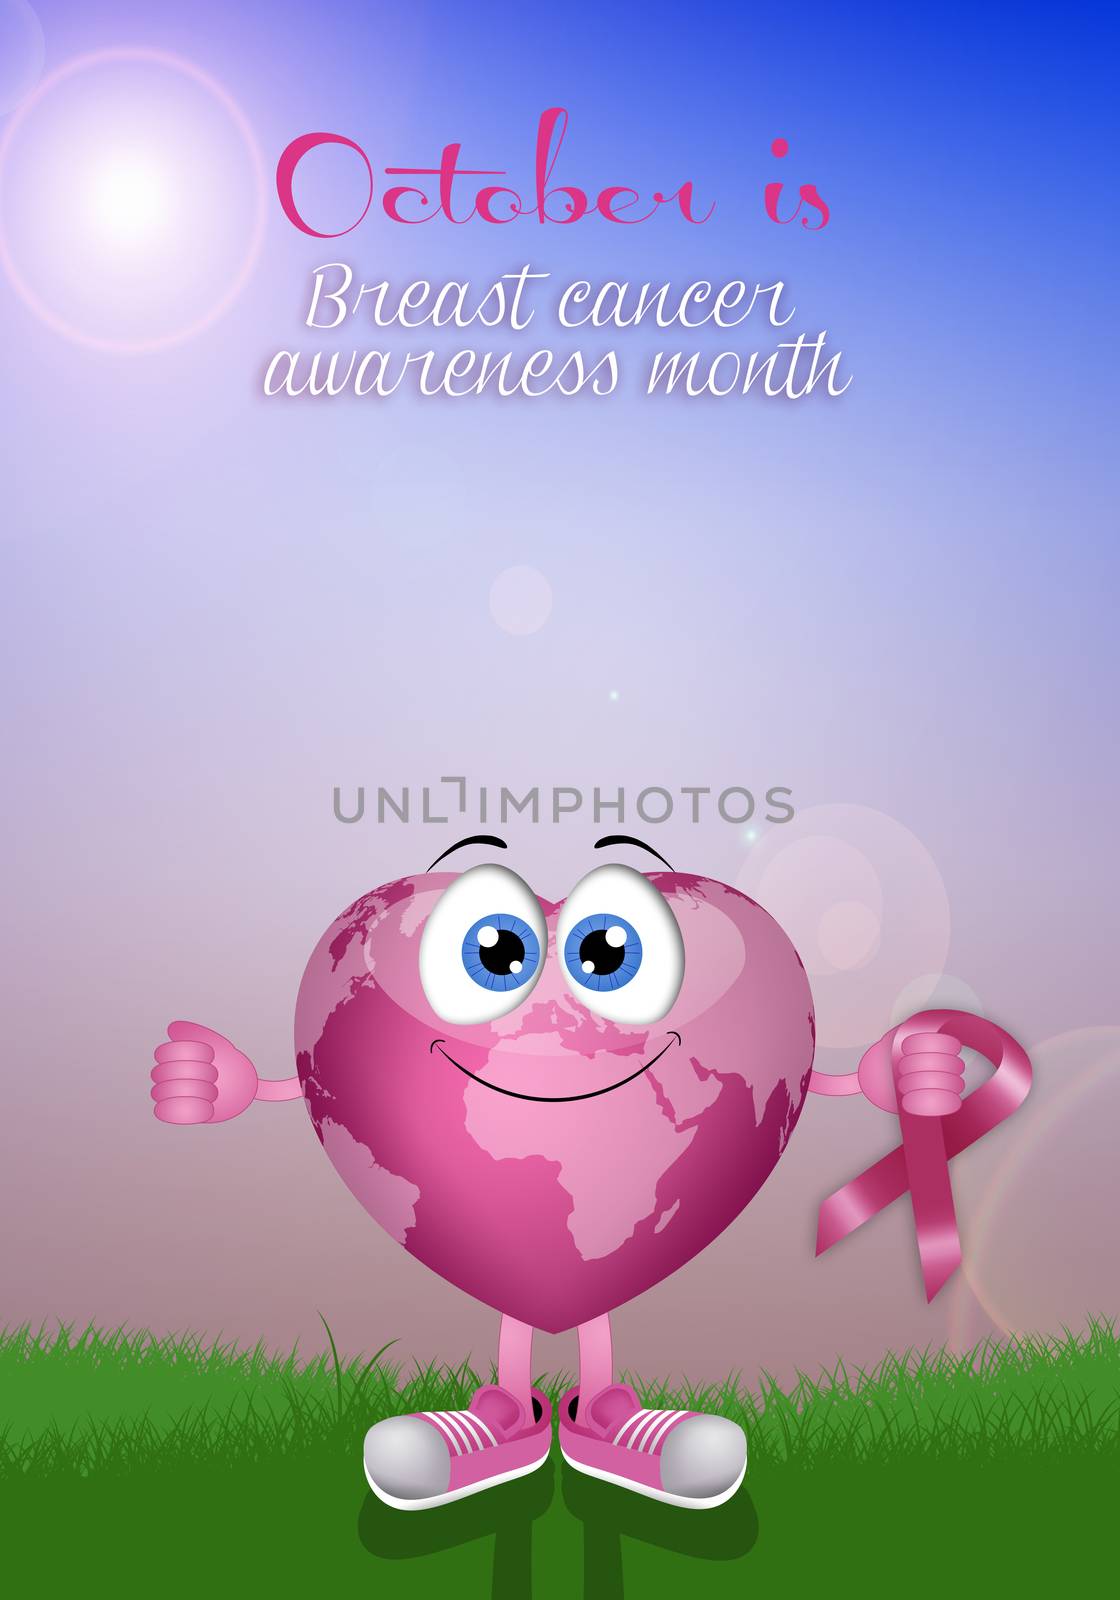 Breast cancer awareness month by sognolucido